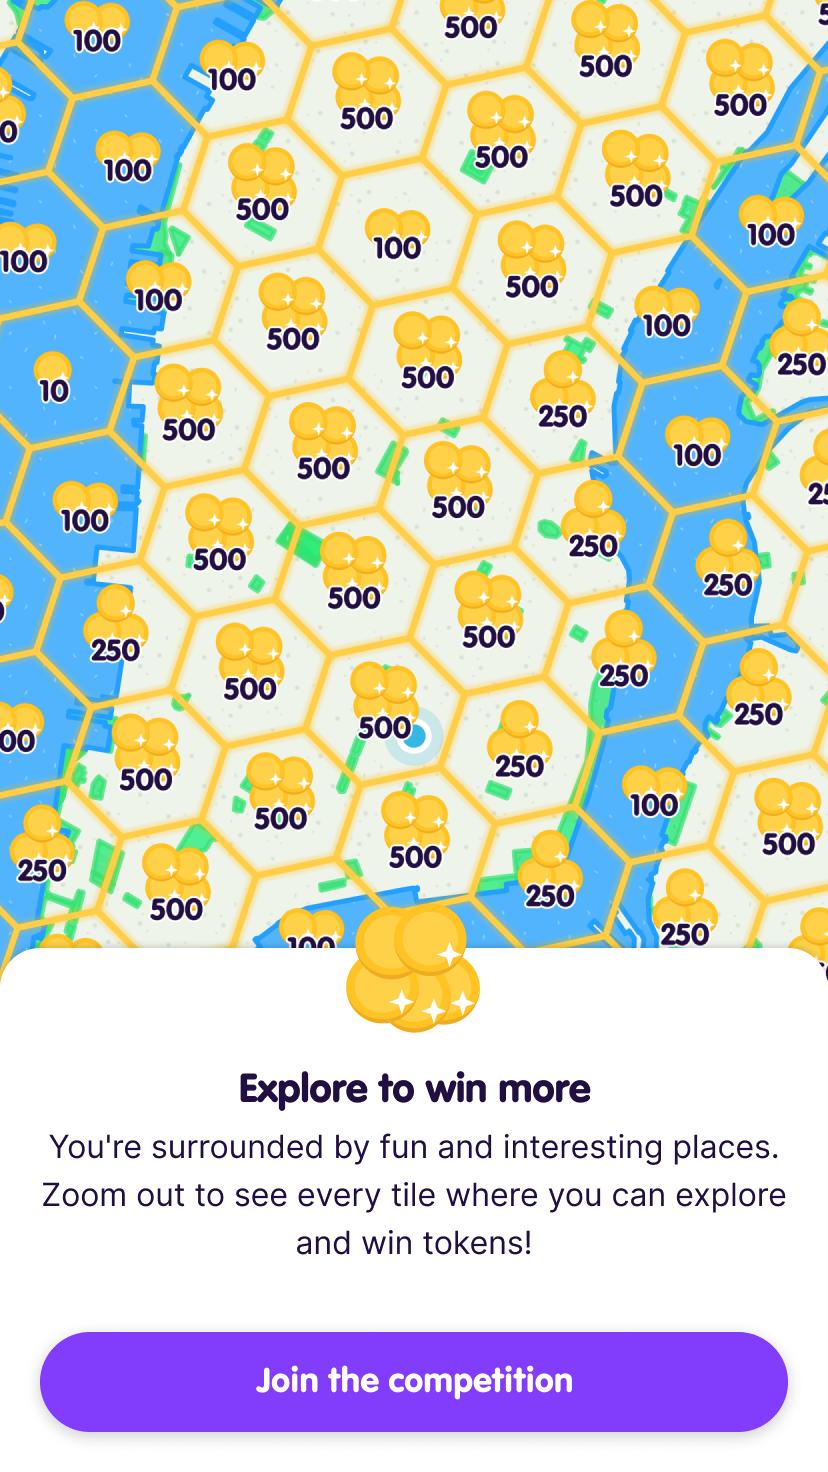 Screenshot from the app intro with a zoomed out map to show the surrounding tiles and available reward amounts. There's a button prompting the user to Join the competition.